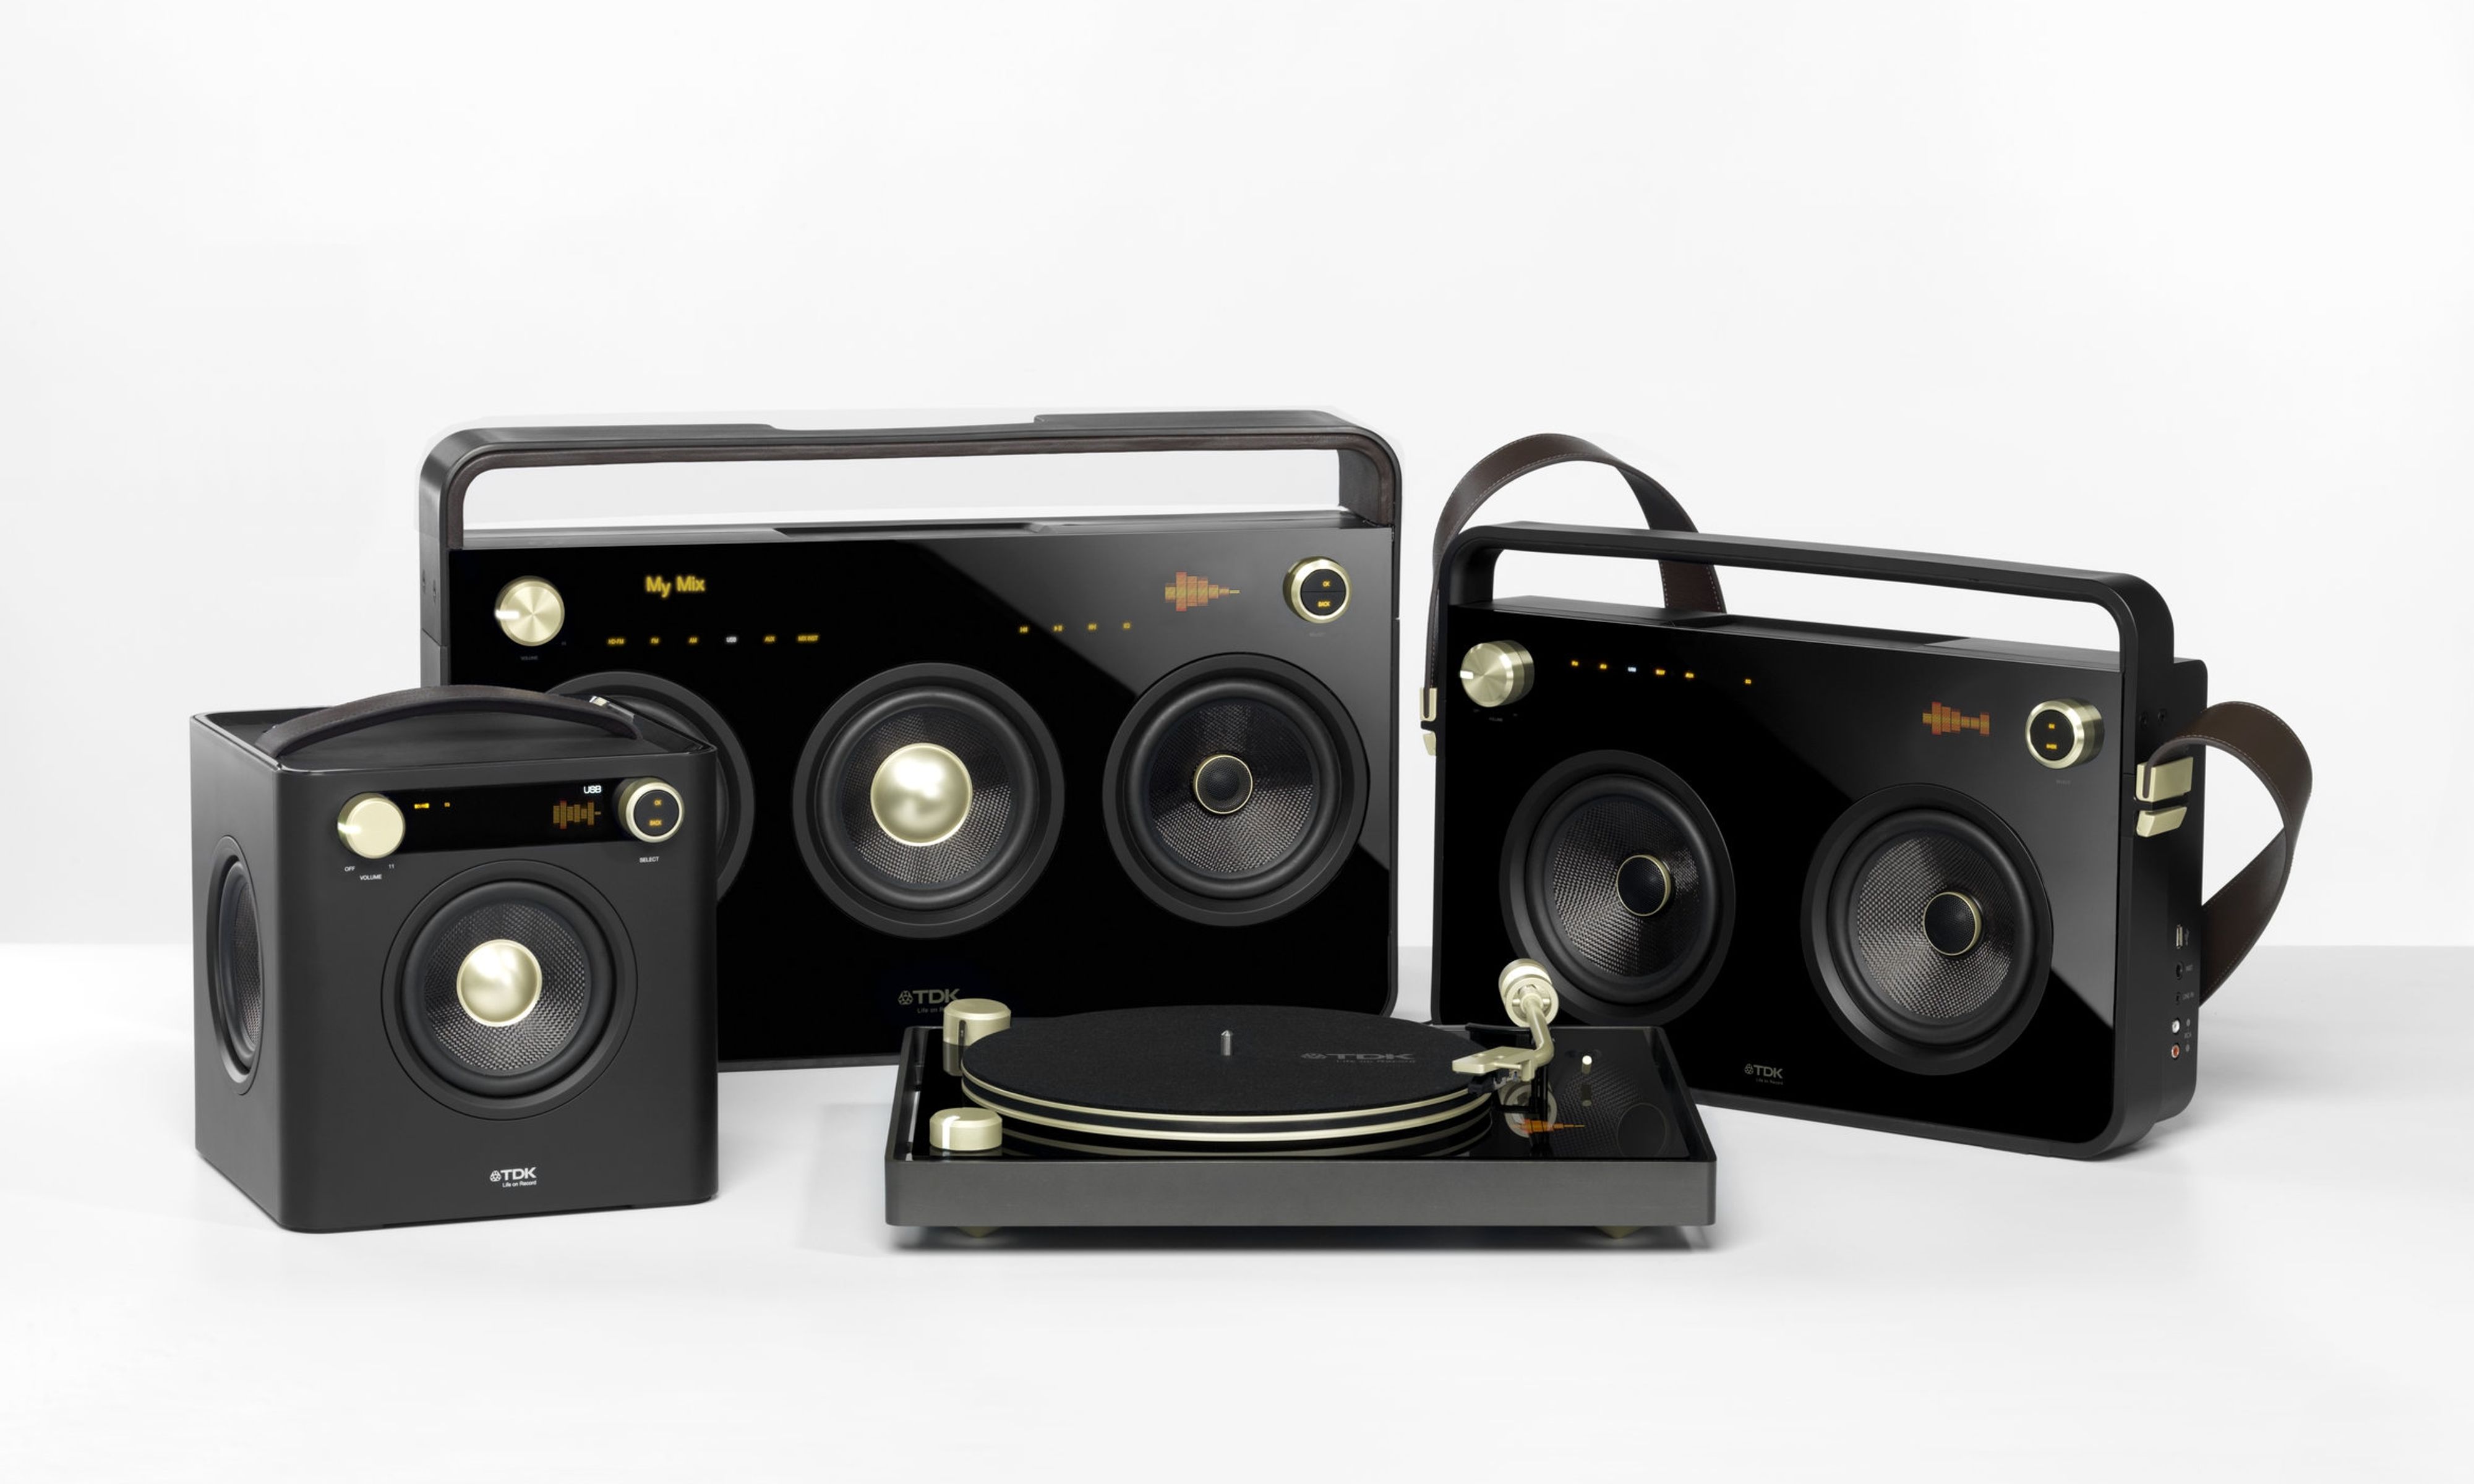 Three black boomboxes and one black record player, all featuring gold hardware and a digital interface with orange coloring